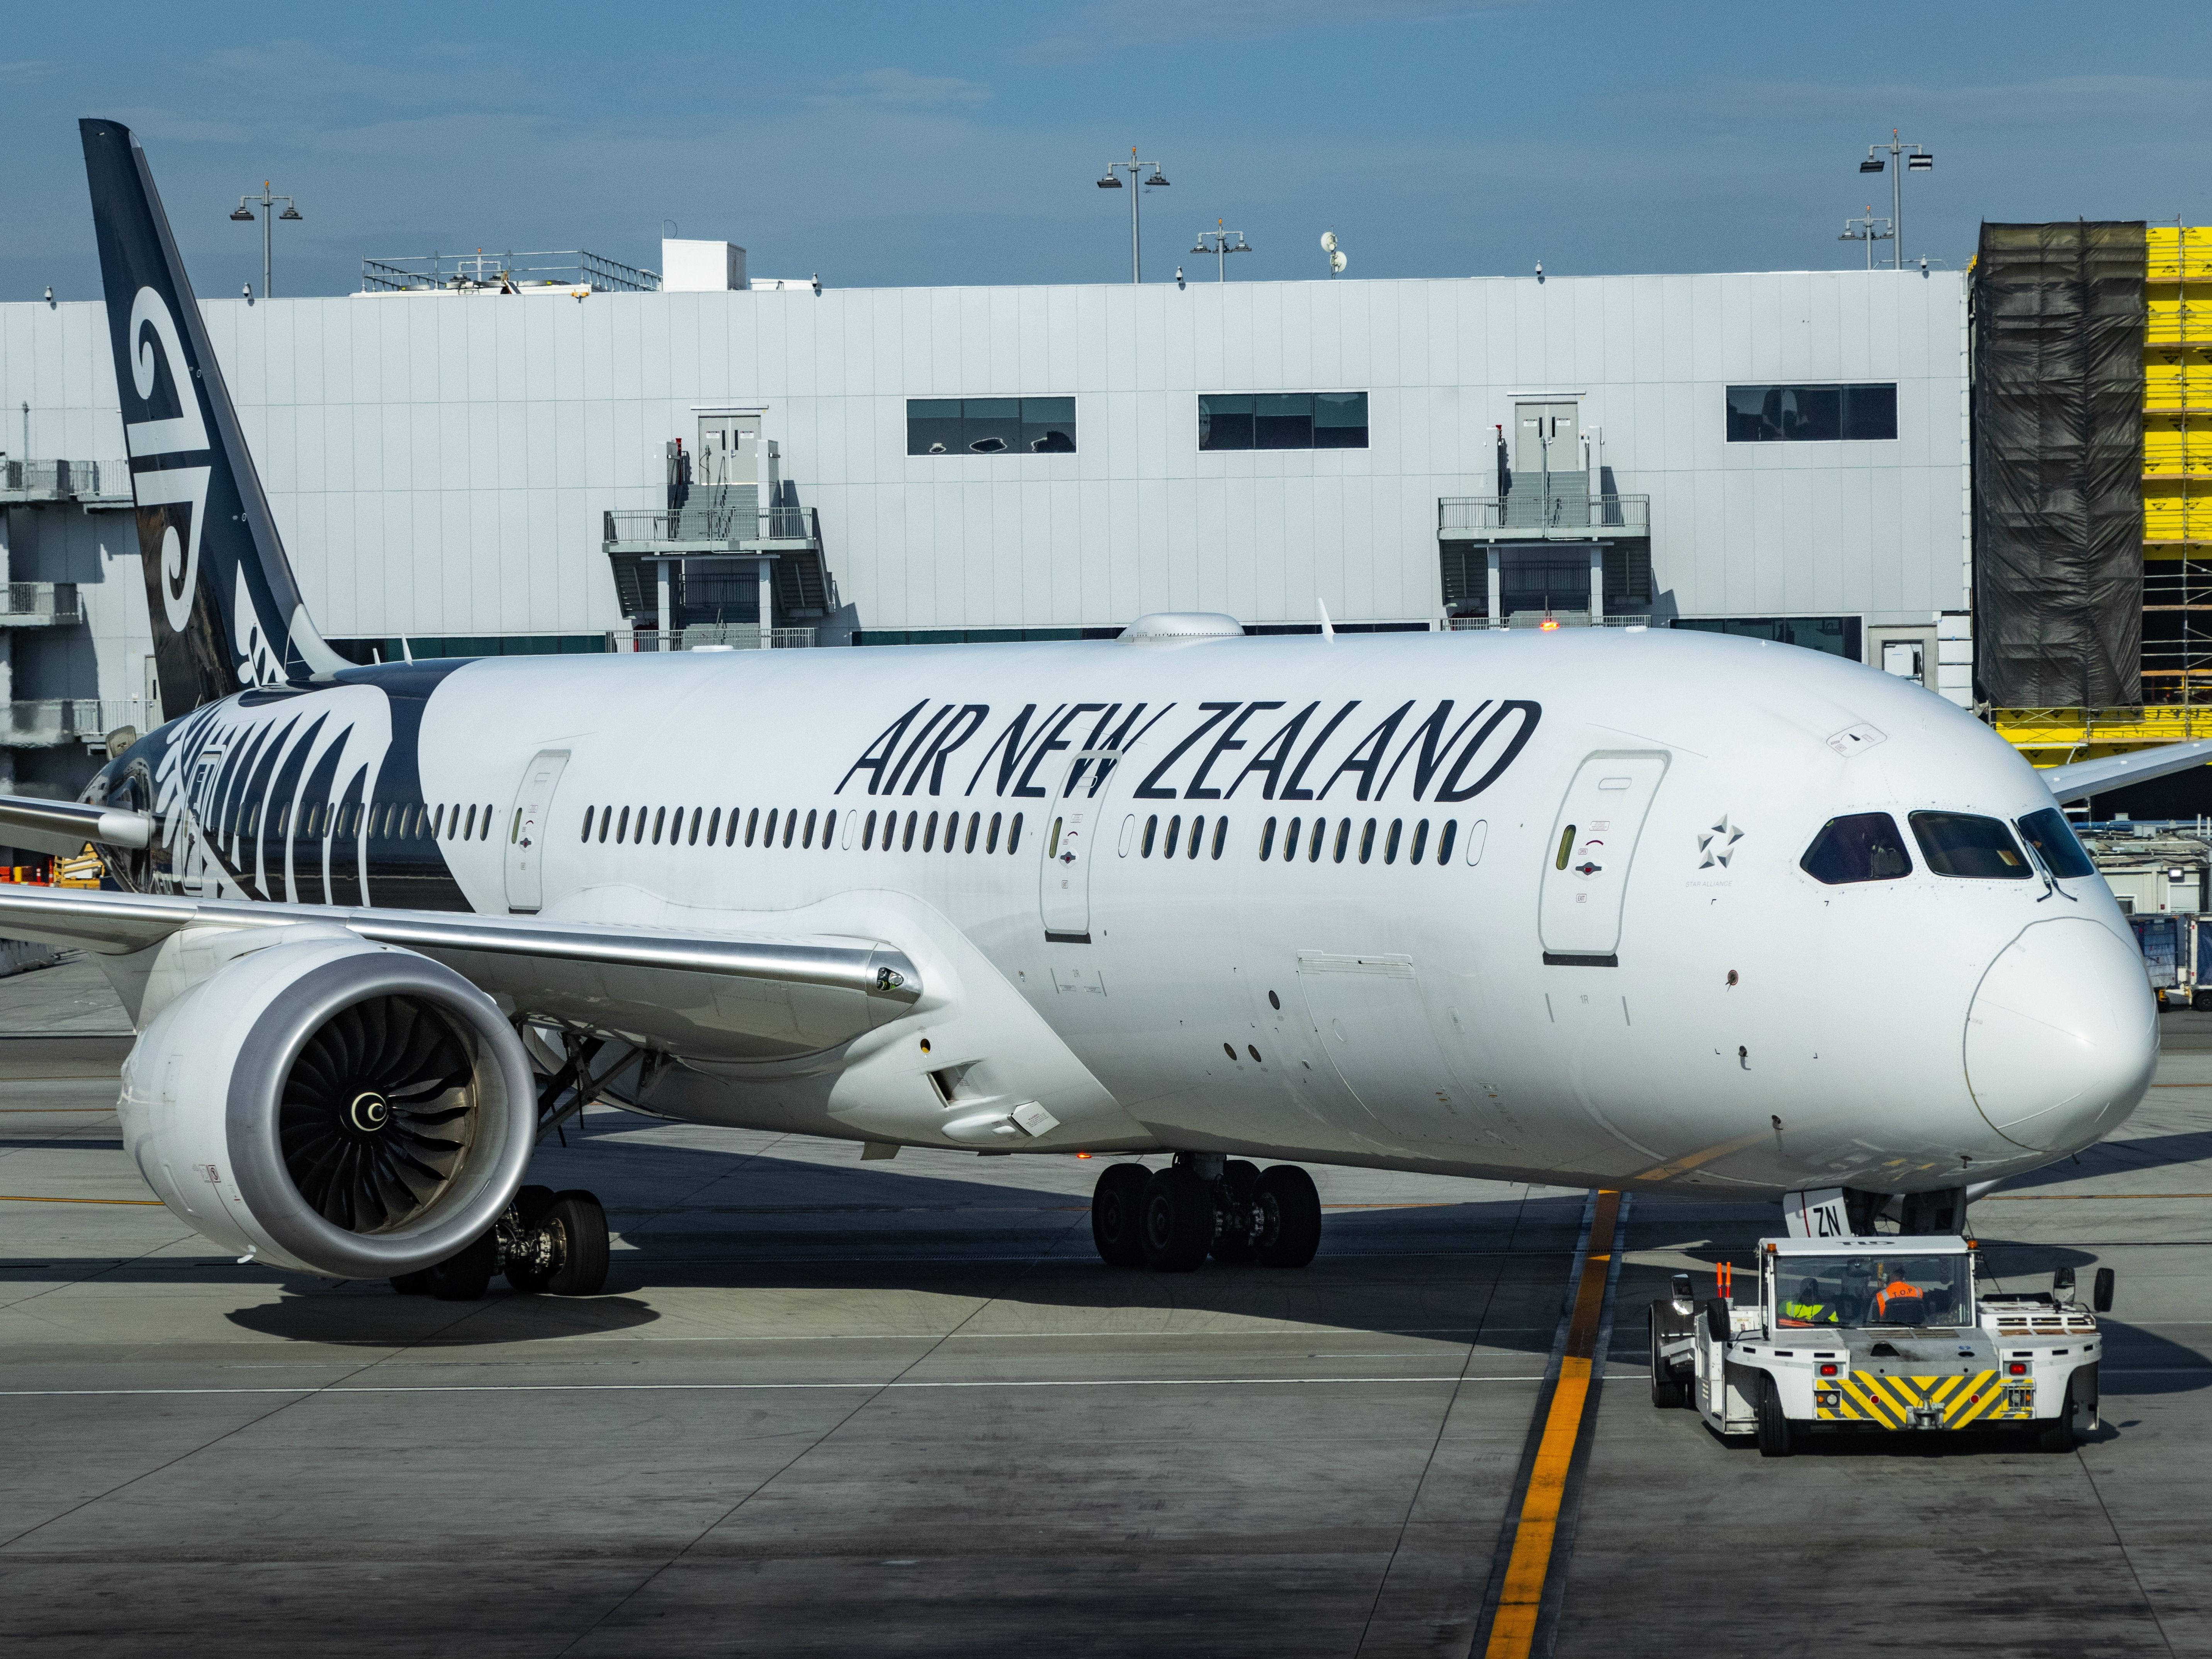 An Air New Zealand Boeing 787 Being Pushed Back on an airport apron.